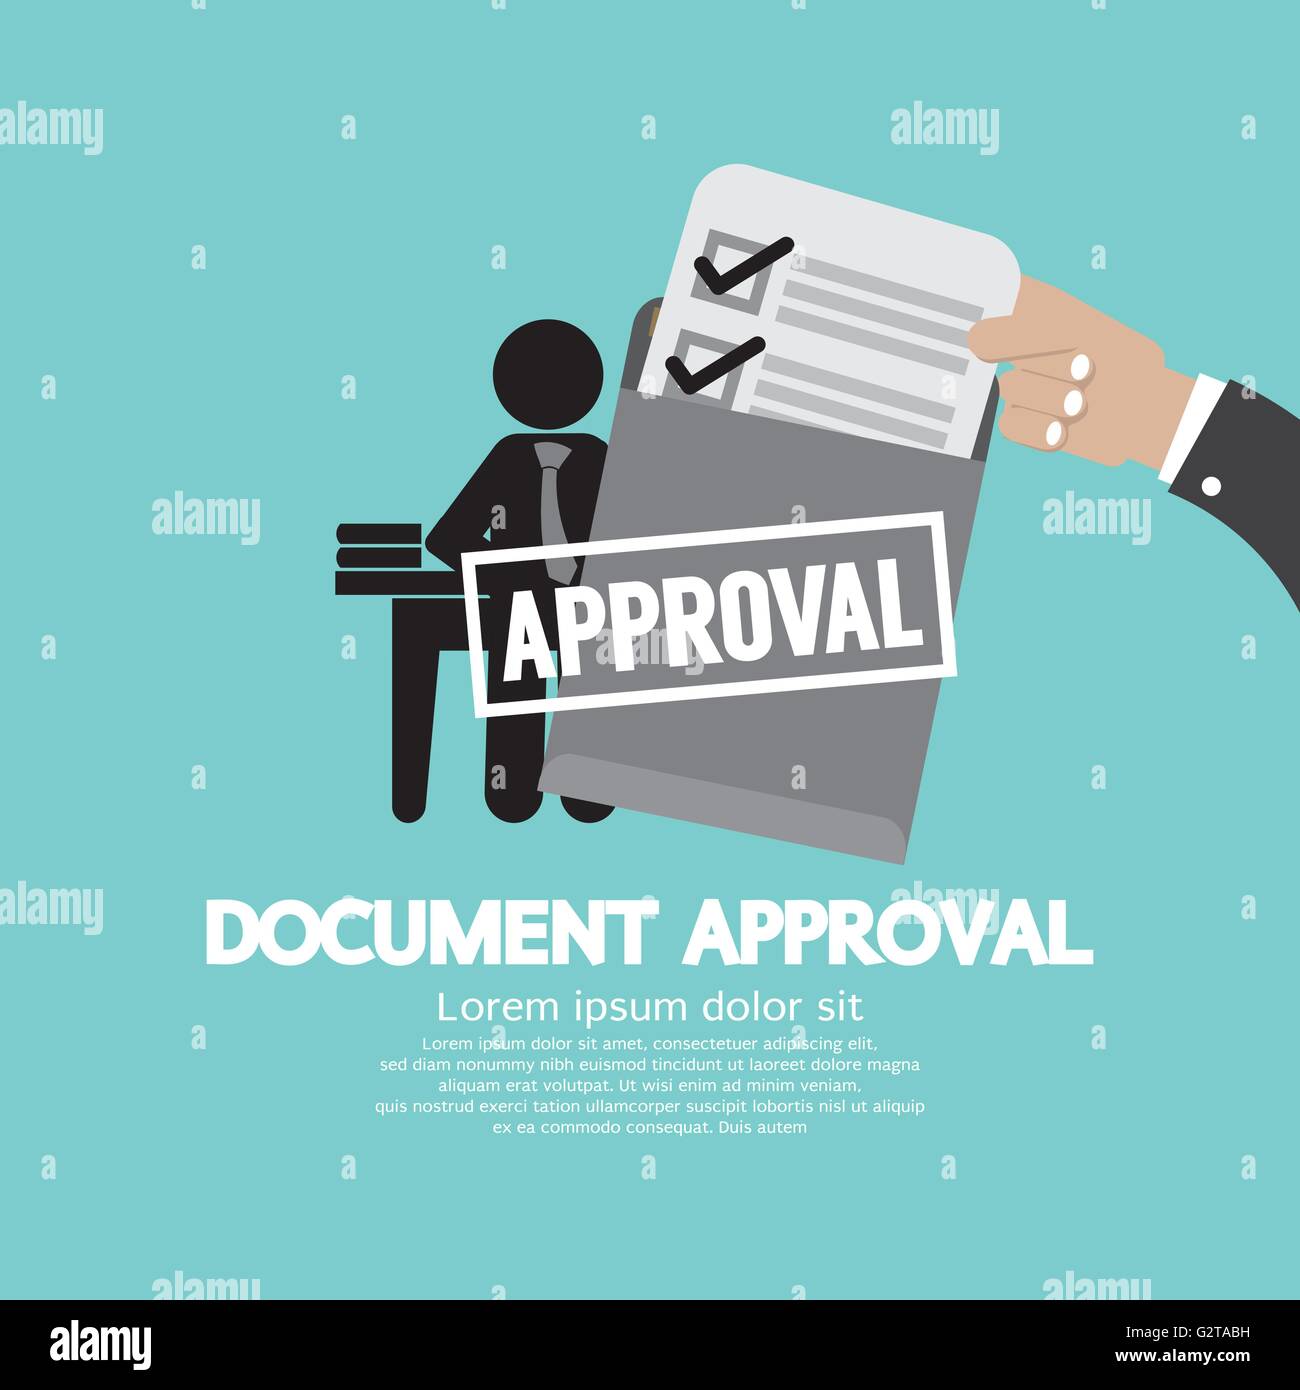 Document Approval Vector Illustration Stock Vector